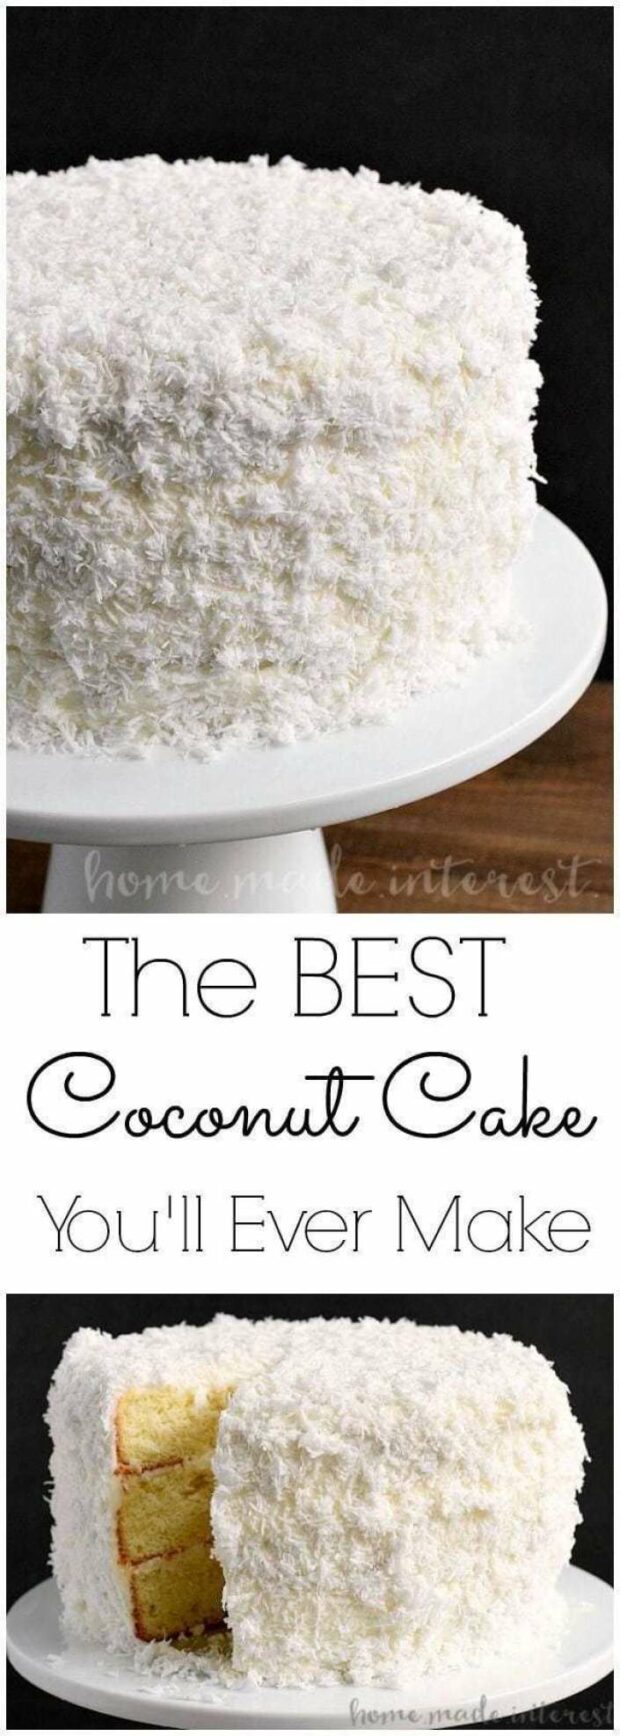 The Best Decadent Cake Recipes to Impress Your Guests (Part 2) - Decadent Cake Recipes, Decadent Cake, cake recipes, birthday cake recipes